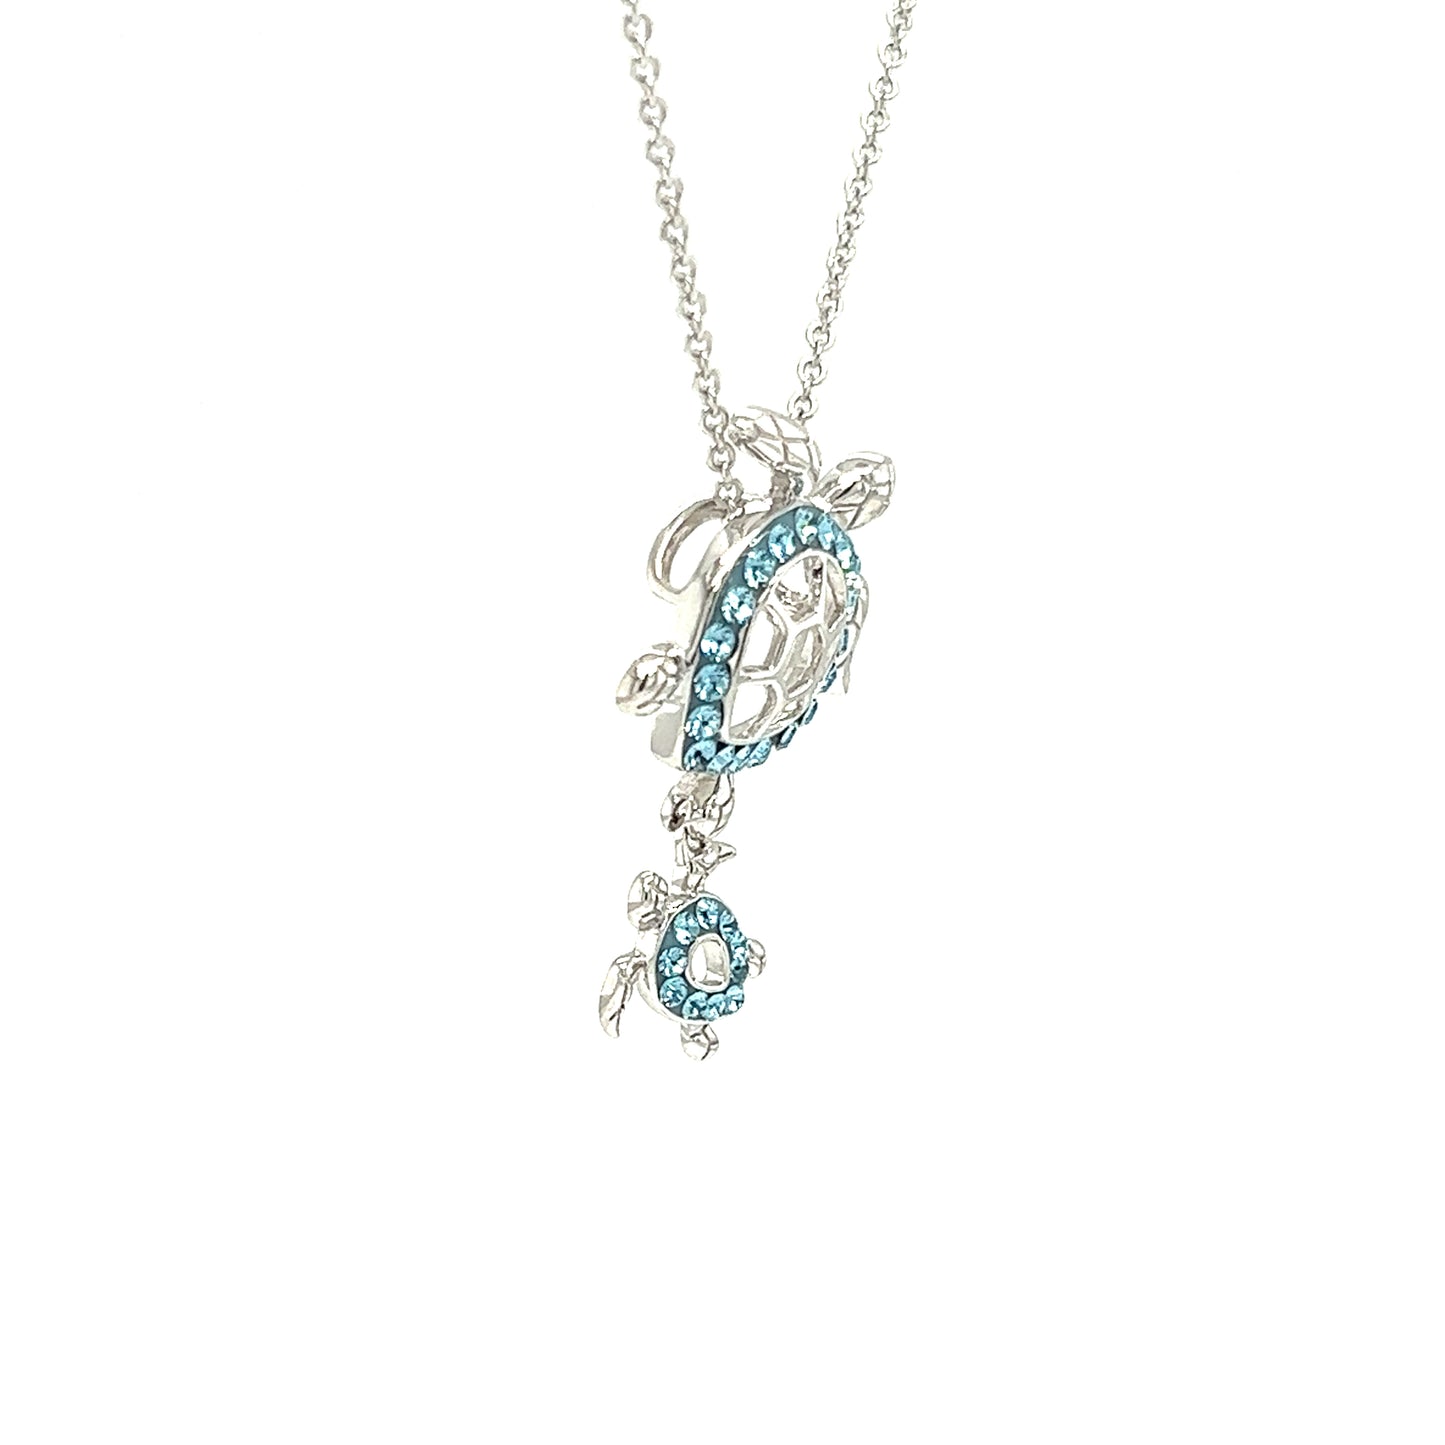 Mother and Baby Sea Turtle Necklace with Aqua Crystals in Sterling Silver Right Side View